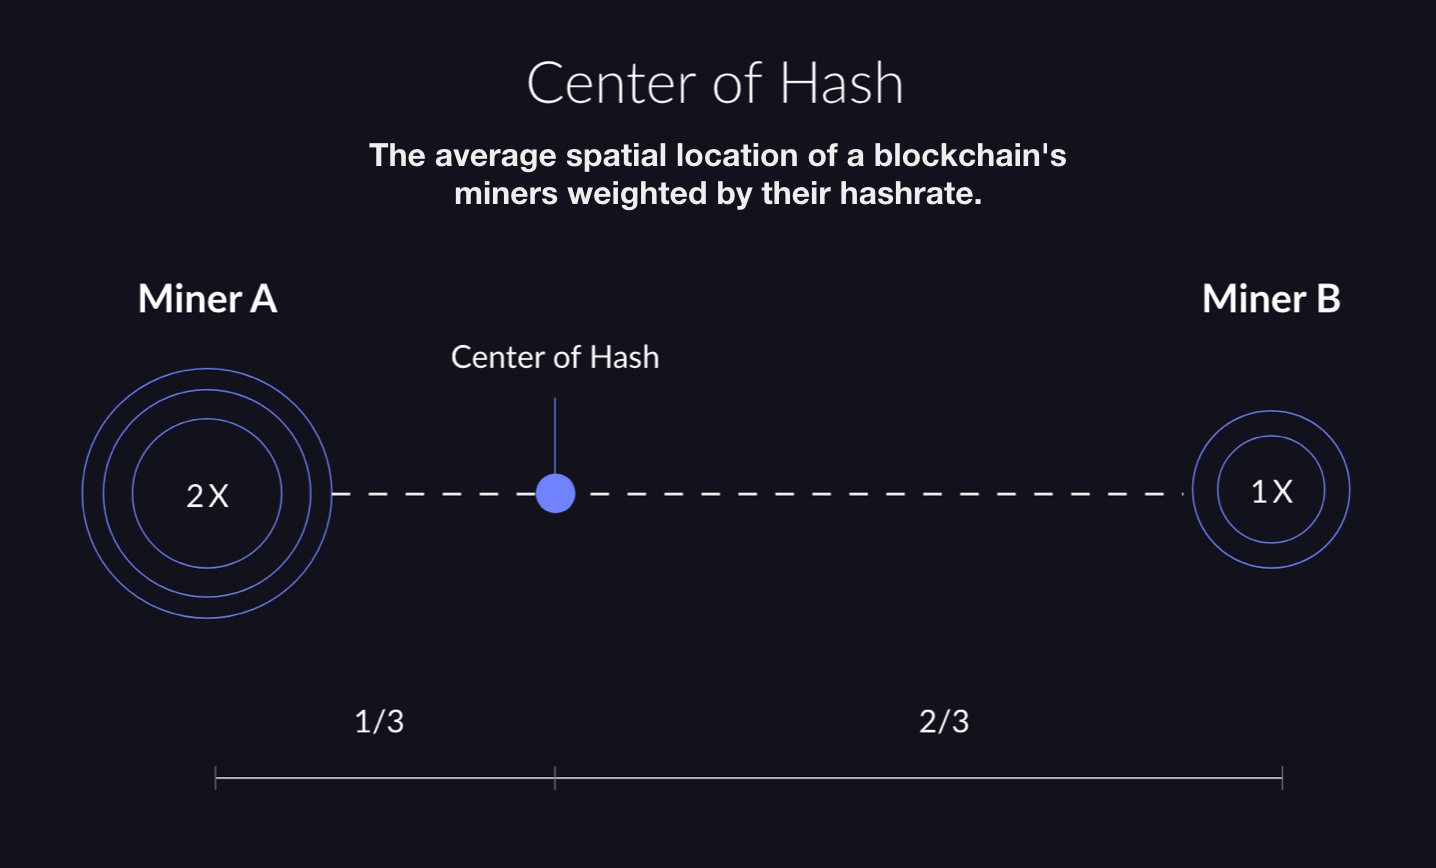 Center of Hash: The average spatial location of a blockchain's miners weighted by their hashrate.